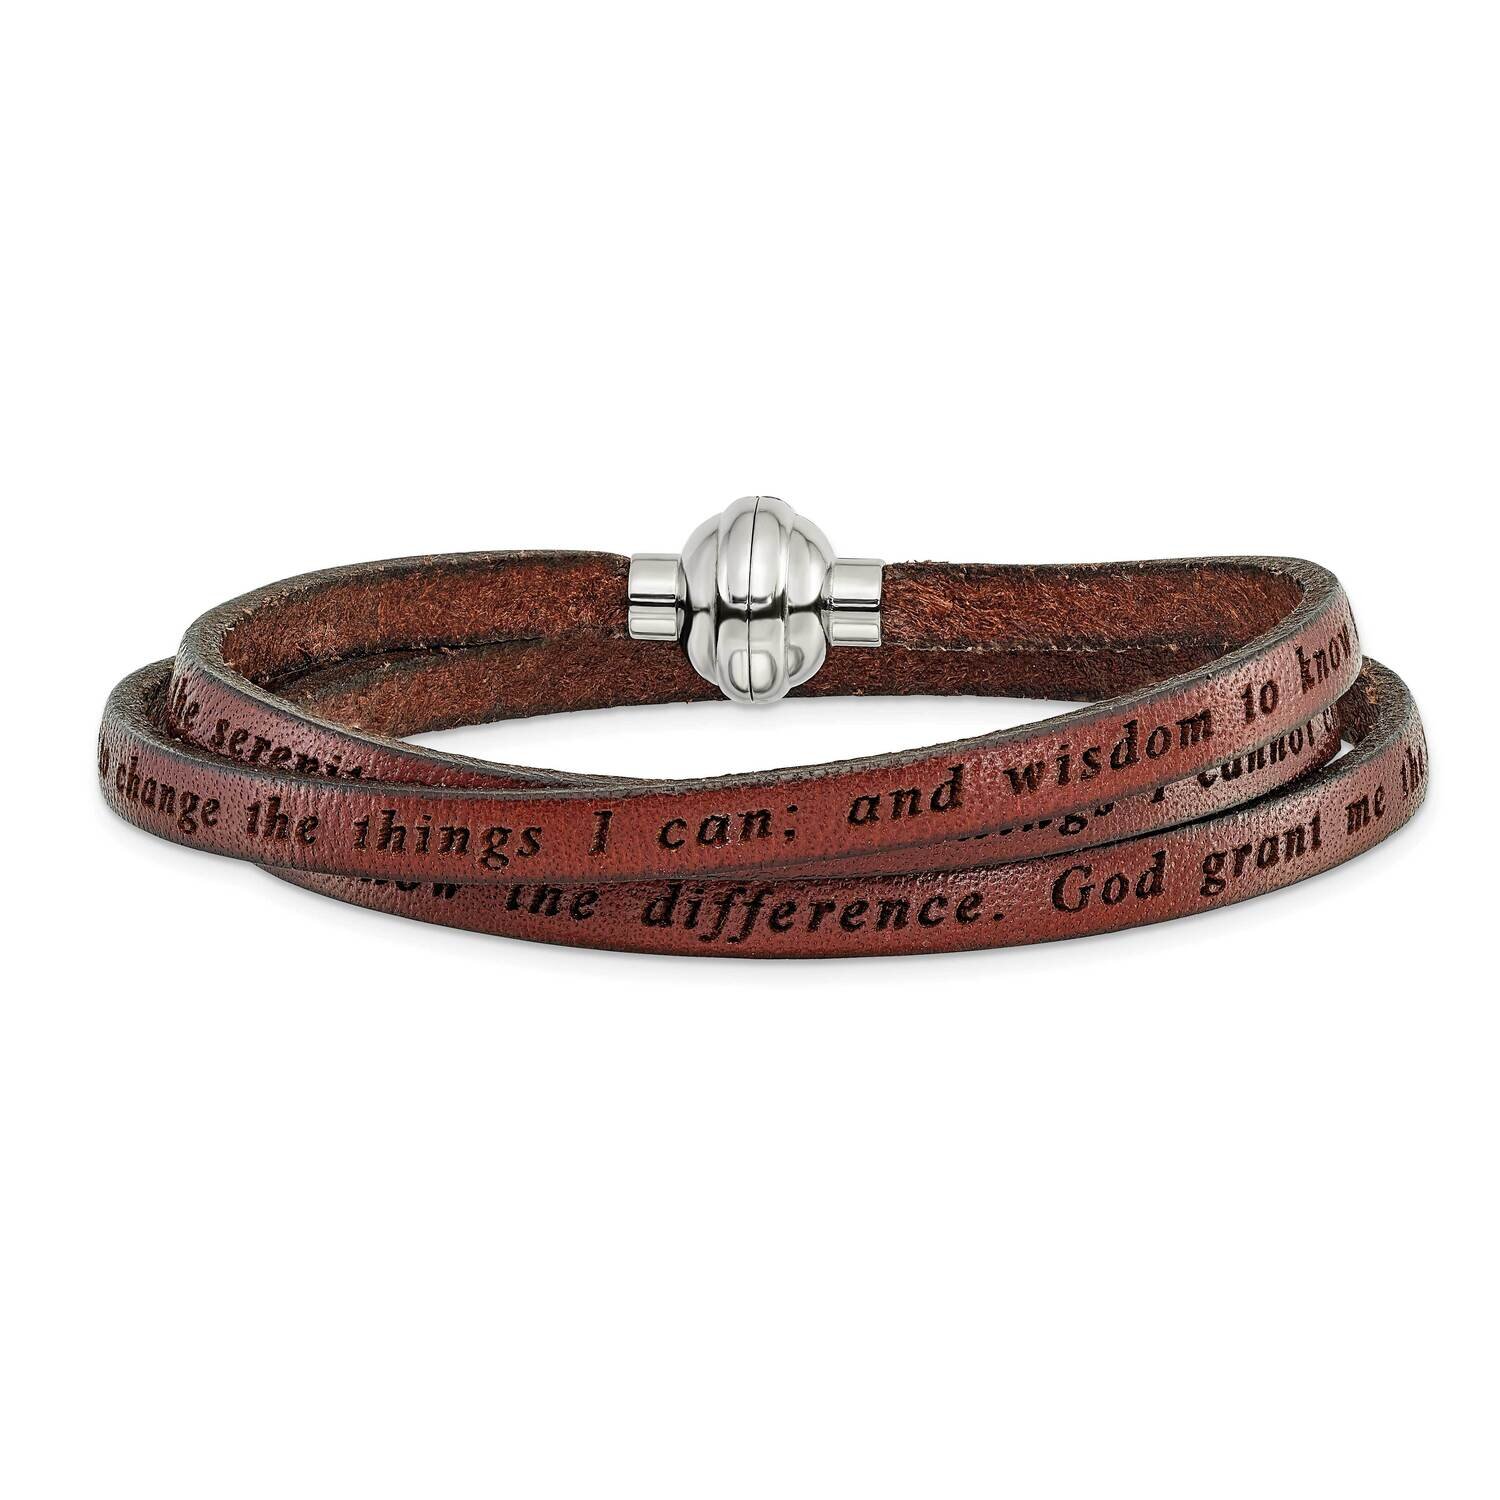 Serenity Prayer Brown Leather Wrap Bracelet Stainless Steel BF3228-MD